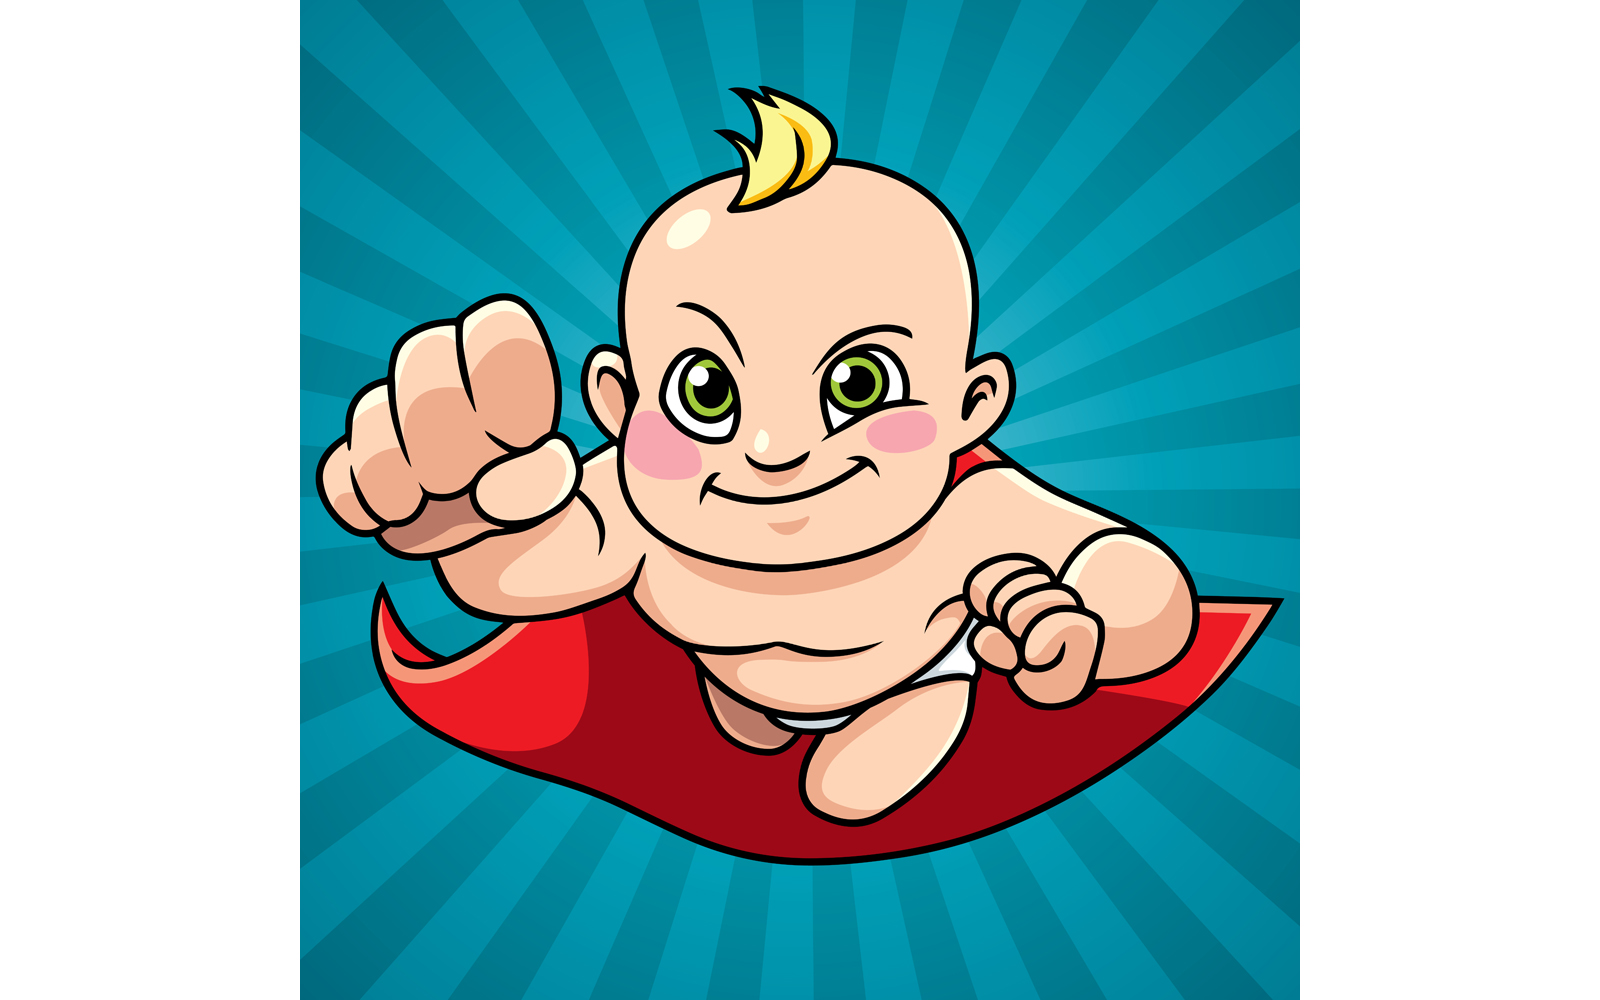 Super Baby Abstract Background - Illustration